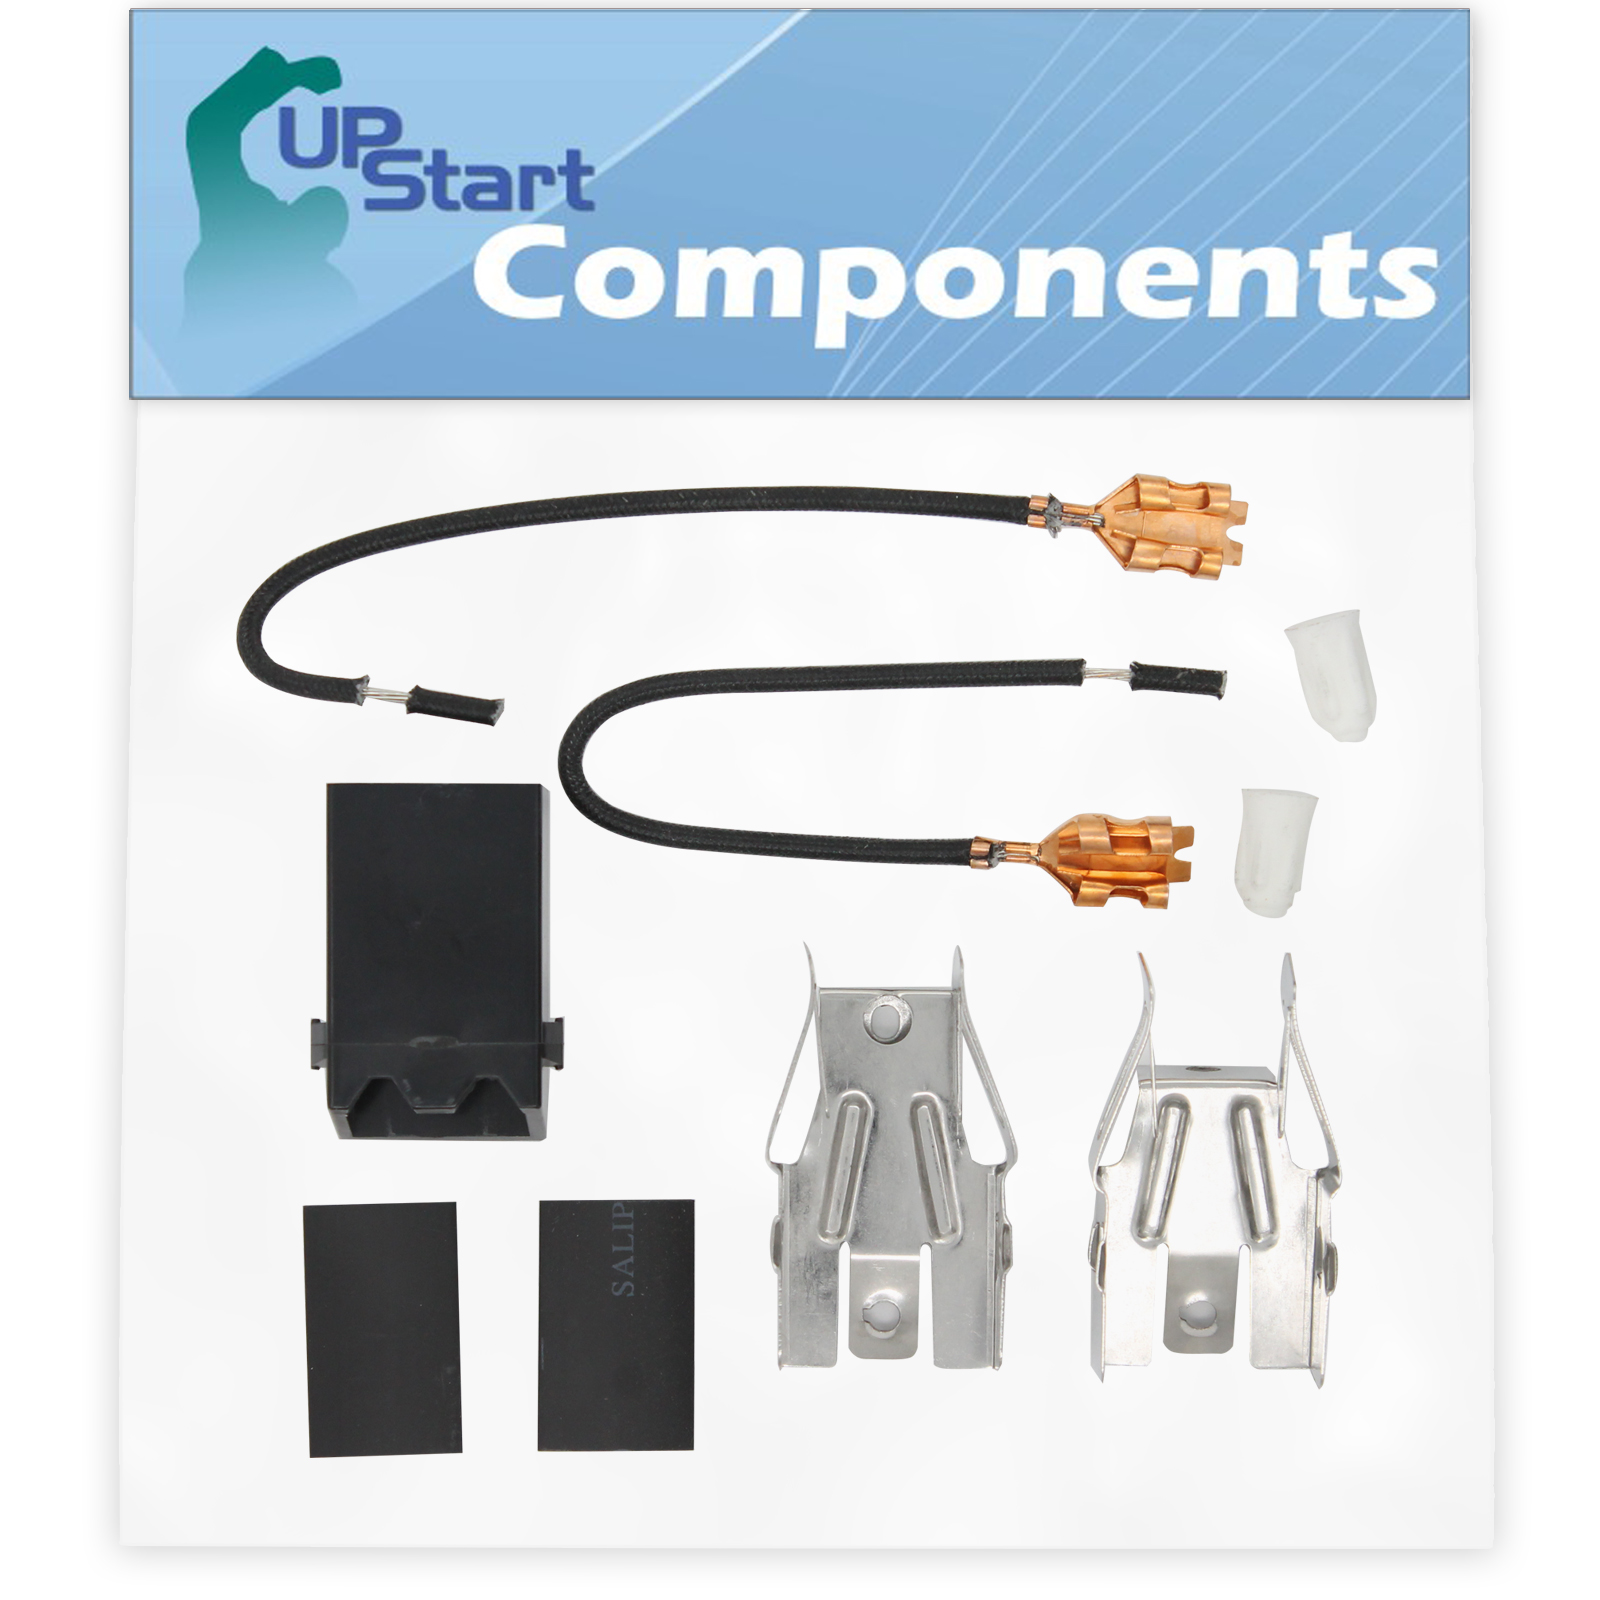 330031 Top Burner Receptacle Kit Replacement for Whirlpool RE963PXPT0 Range/Cooktop/Oven - Compatible with 330031 Range Burner Receptacle Kit - UpStart Components Brand - image 1 of 4